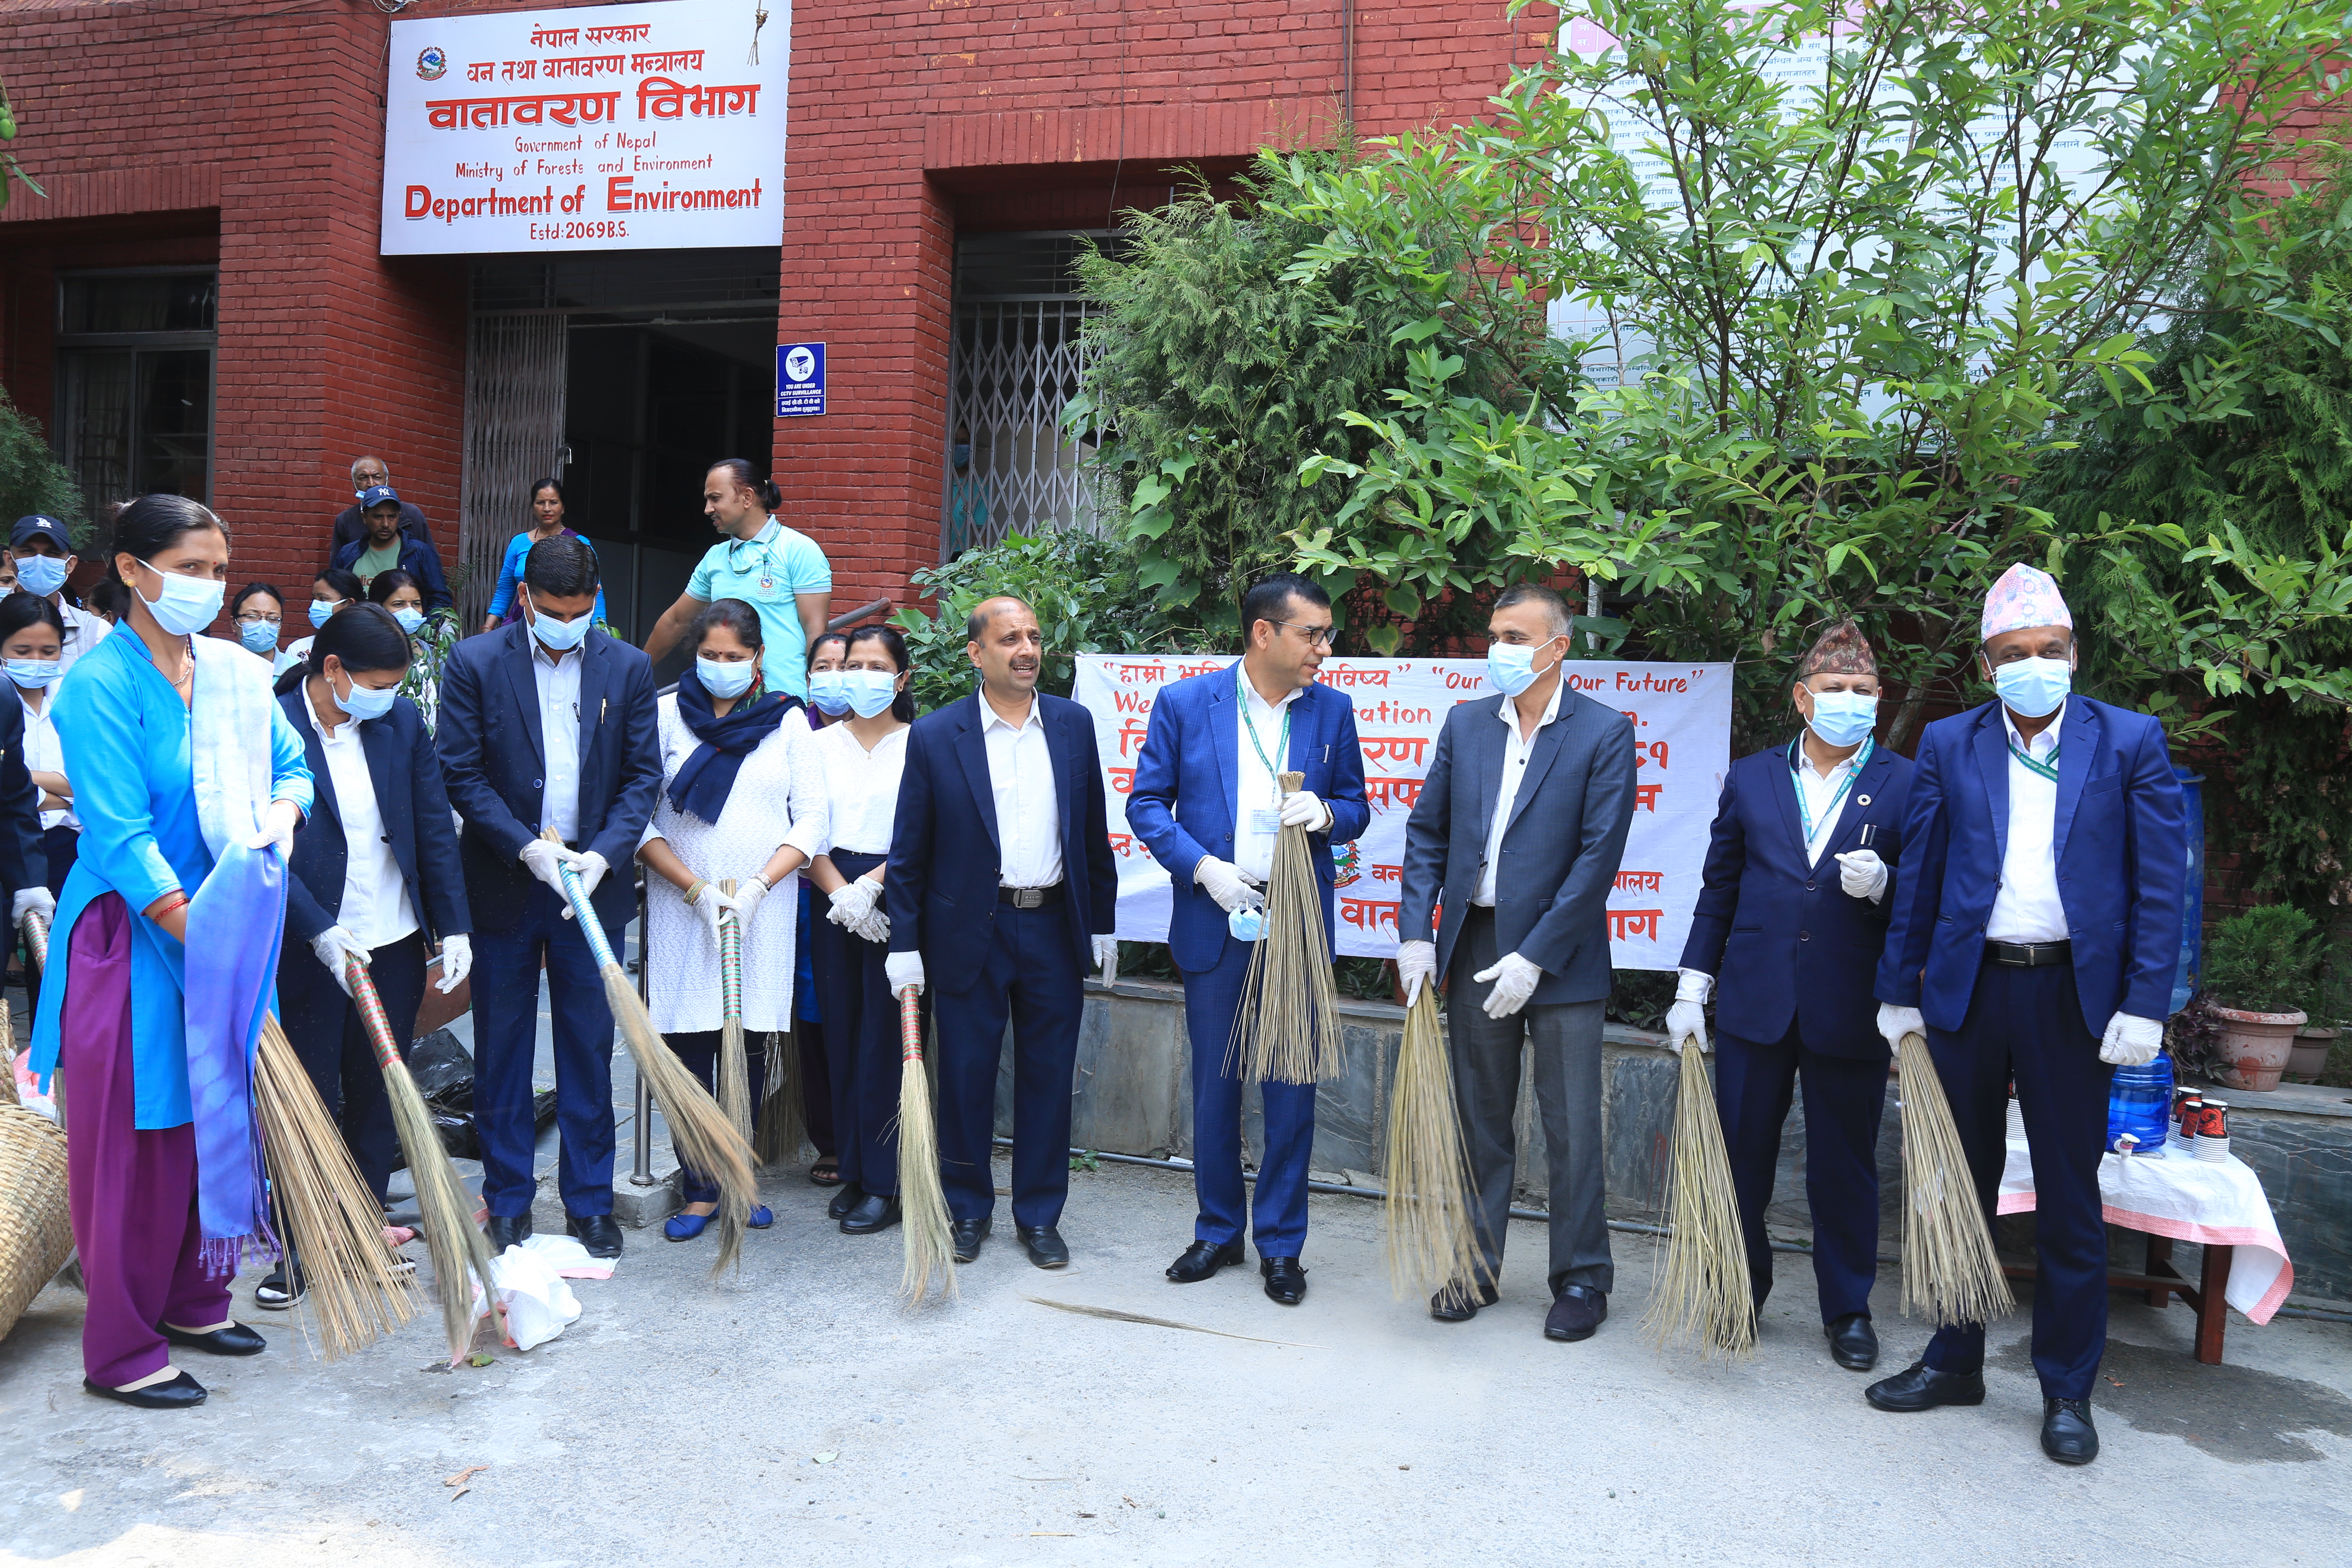 Slider Image: Cleanliness campaign